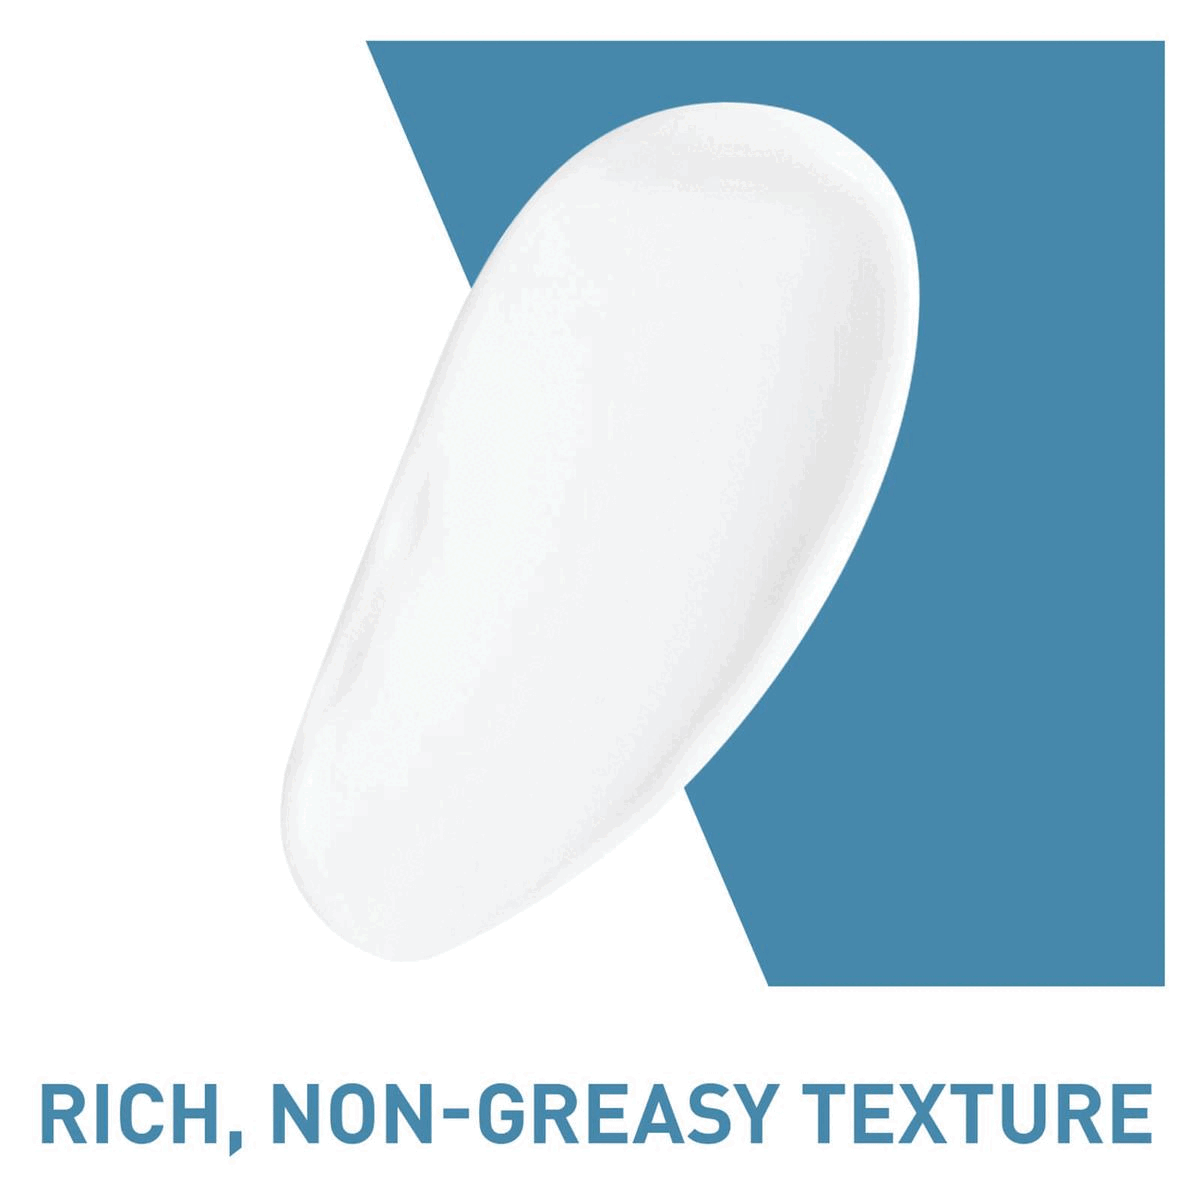 Image 1- RICH, NON-GREASY TEXTURE Image 2- CeraVe
              DEVELOPED WITH DERMATOLOGISTS Image 3- SOFT, POWDERY FINISH